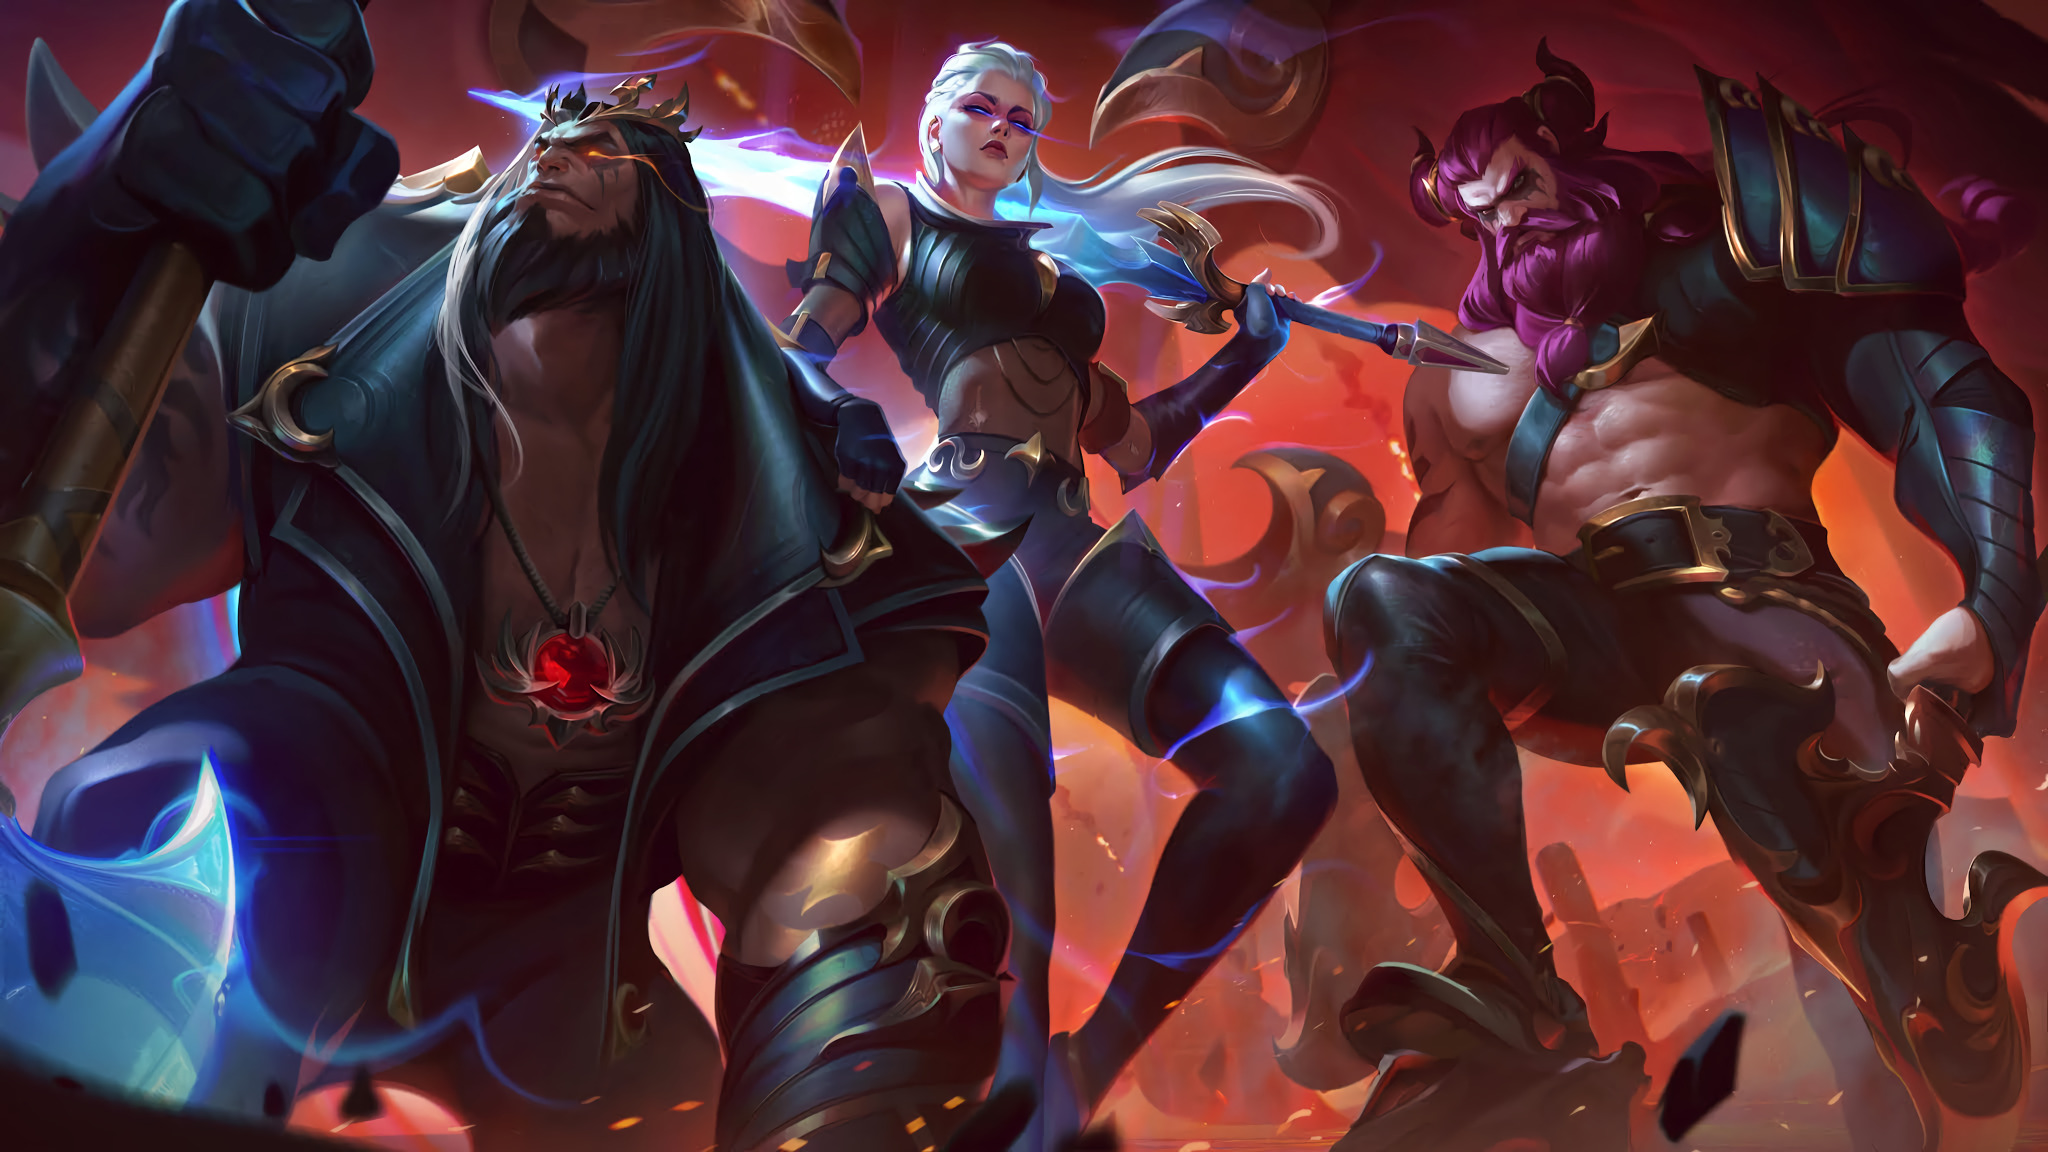 video game, league of legends, kayle (league of legends), olaf (league of legends), pentakill (league of legends), yorick (league of legends)